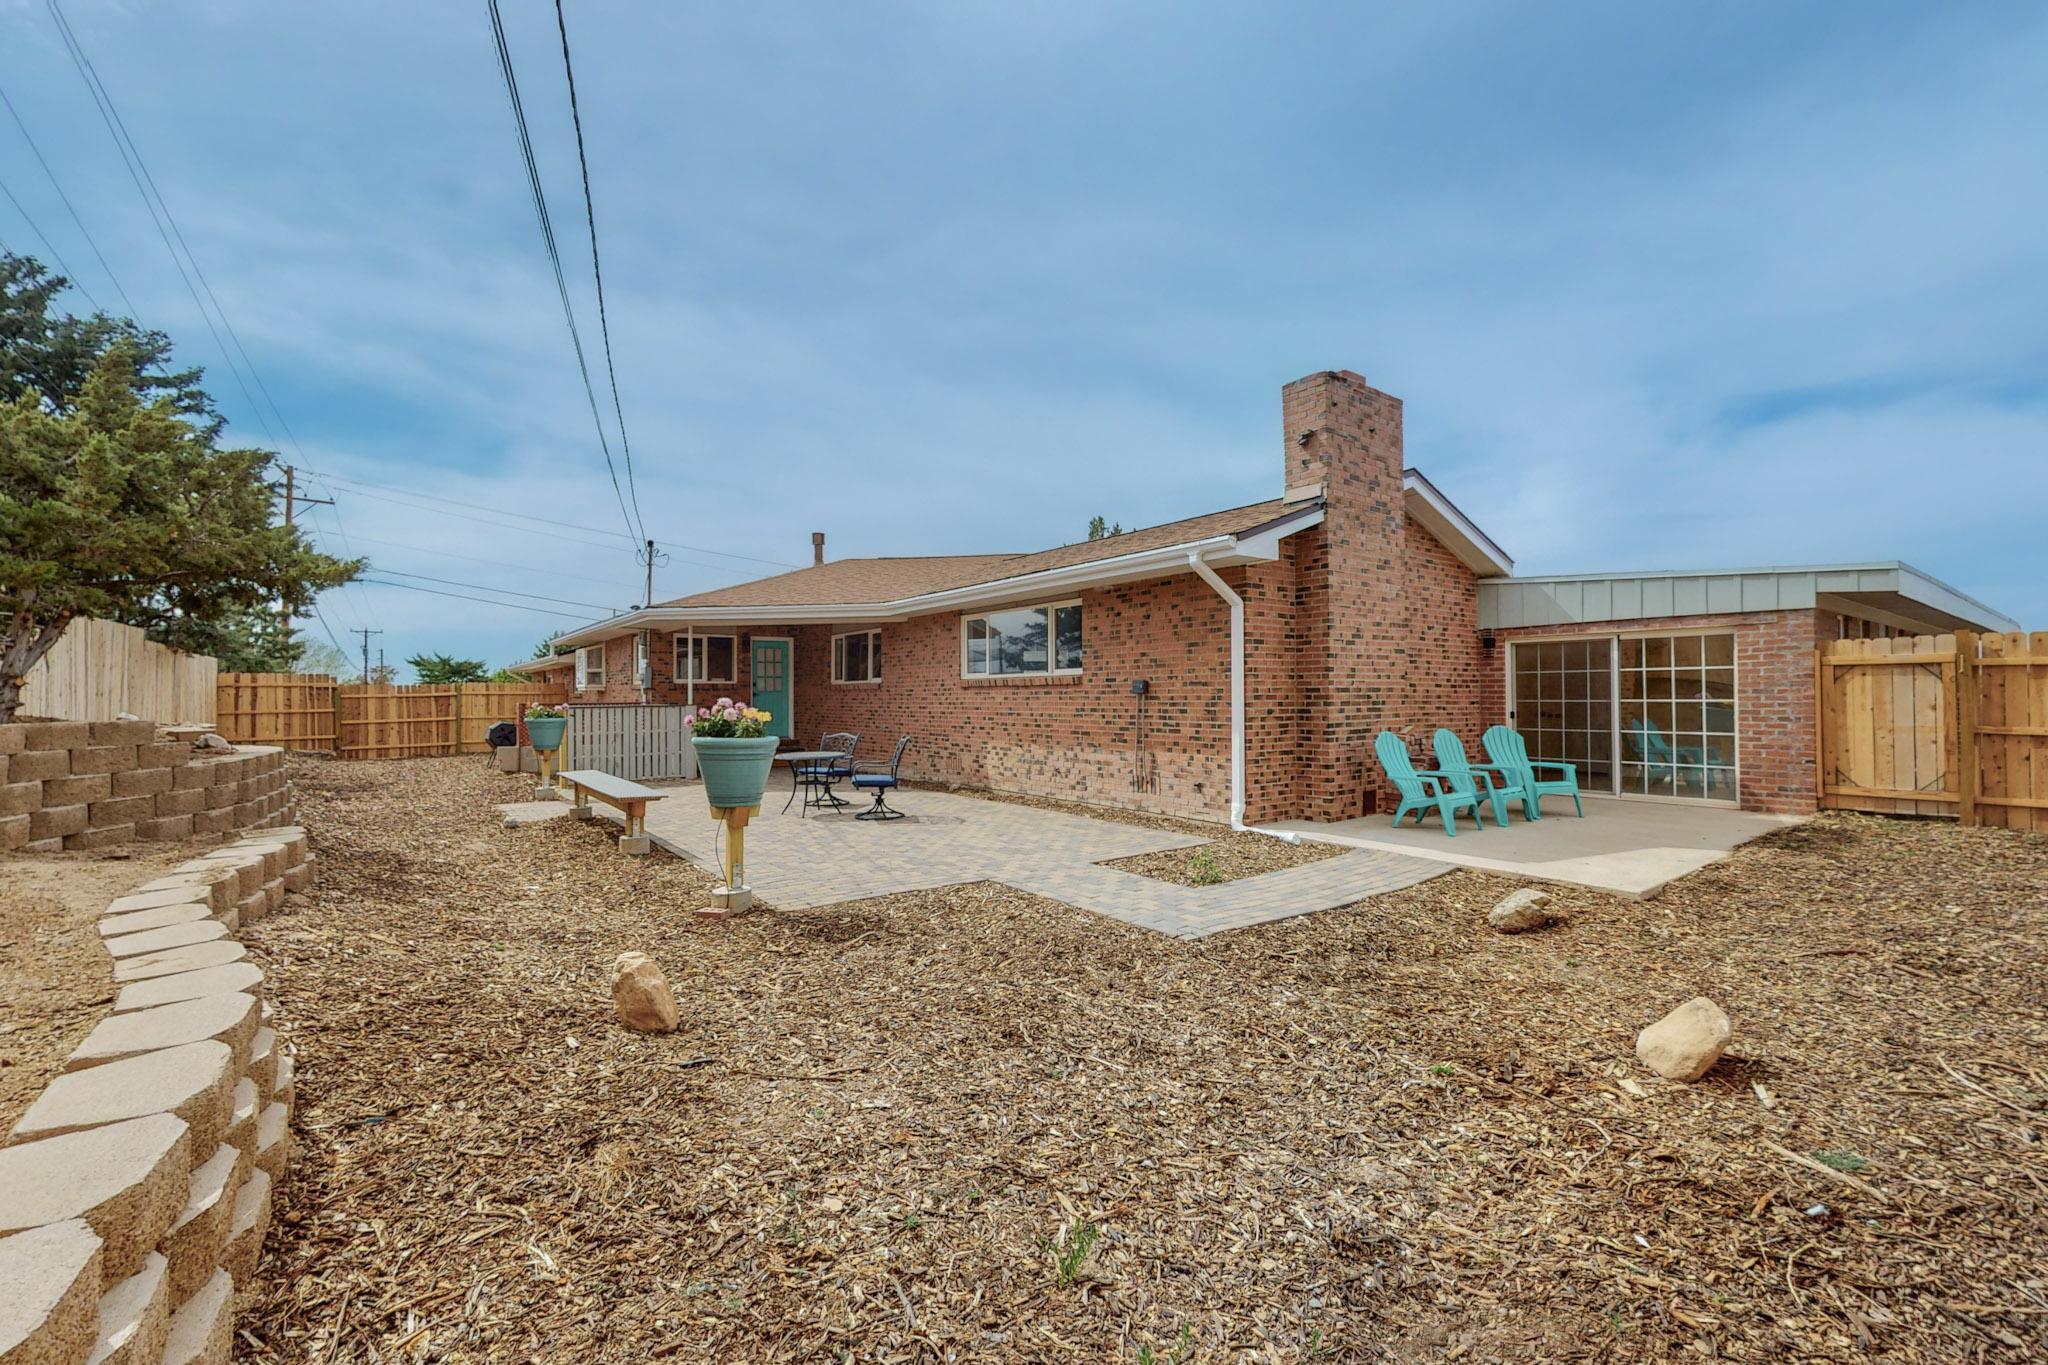 806 Four Hills Road SE, Albuquerque, New Mexico 87123, 3 Bedrooms Bedrooms, ,4 BathroomsBathrooms,Residential,For Sale,806 Four Hills Road SE,1061390